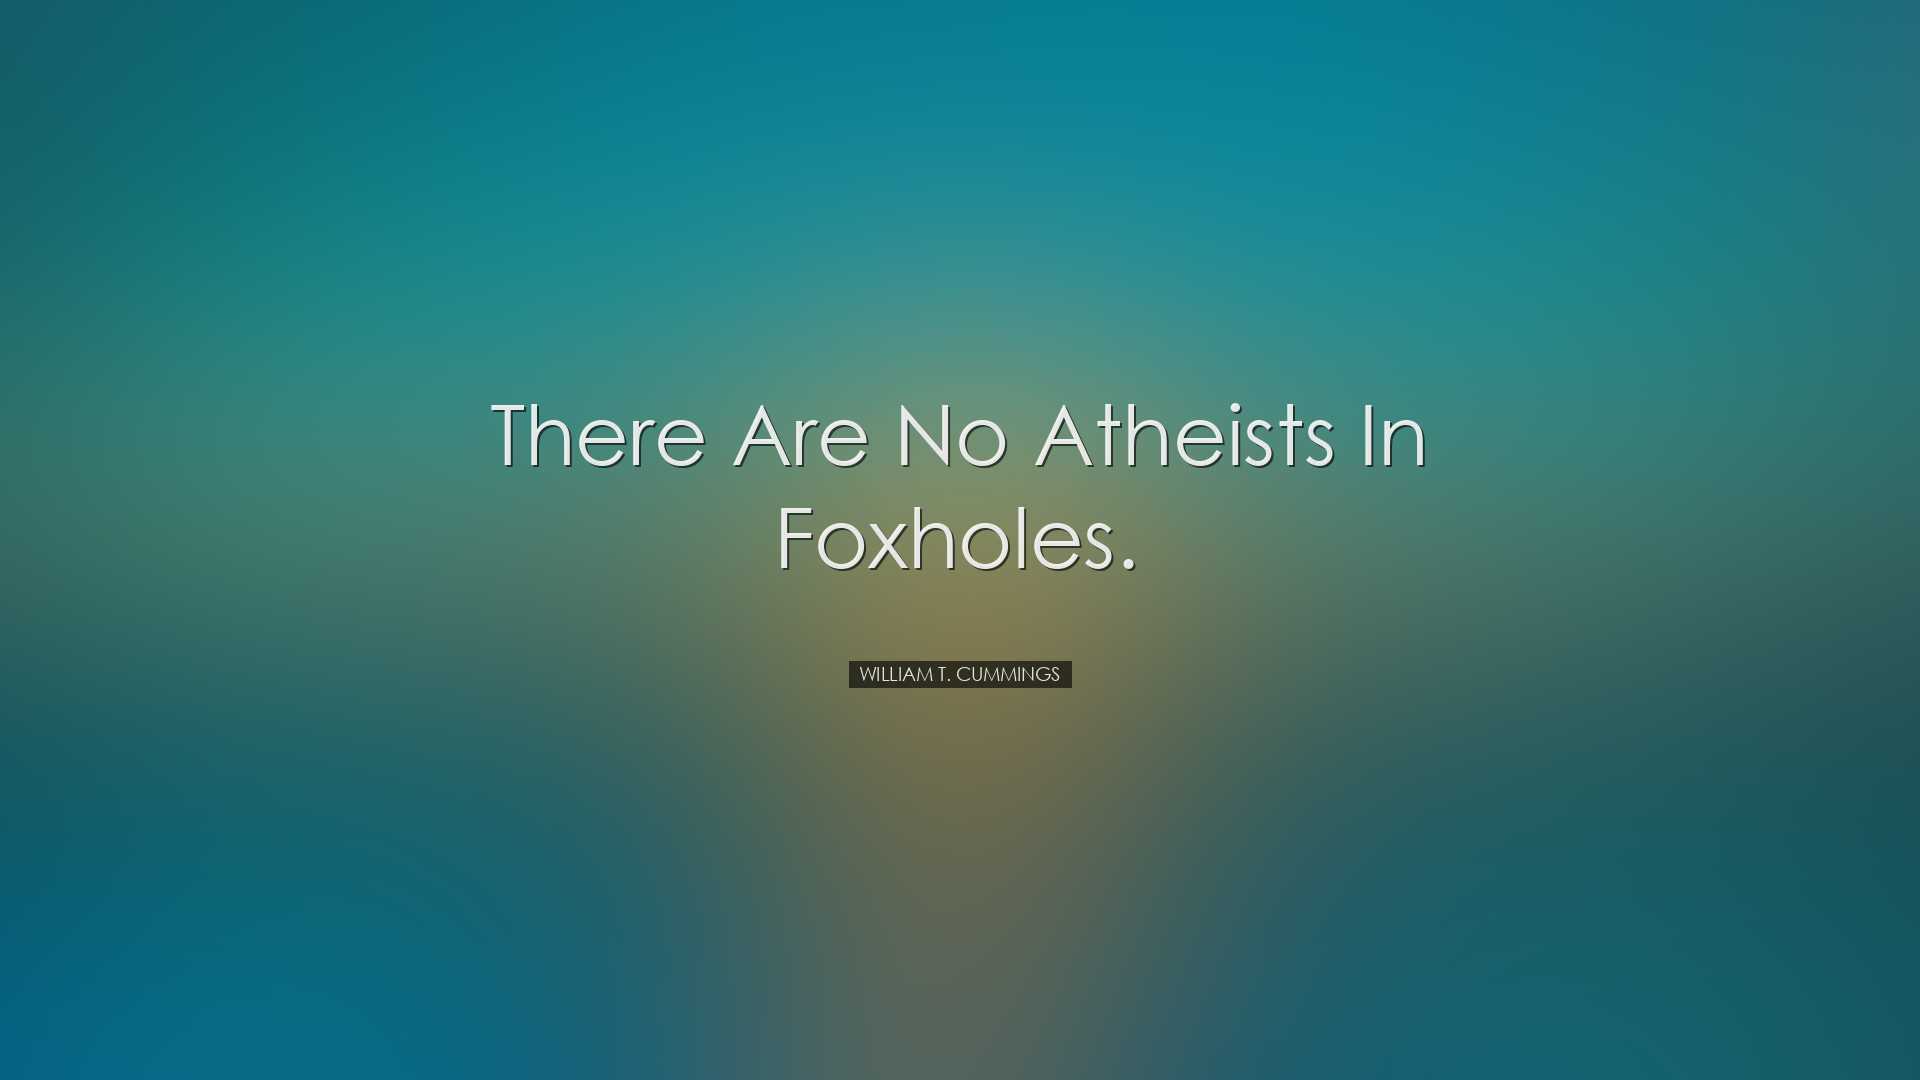 There are no atheists in foxholes. - William T. Cummings